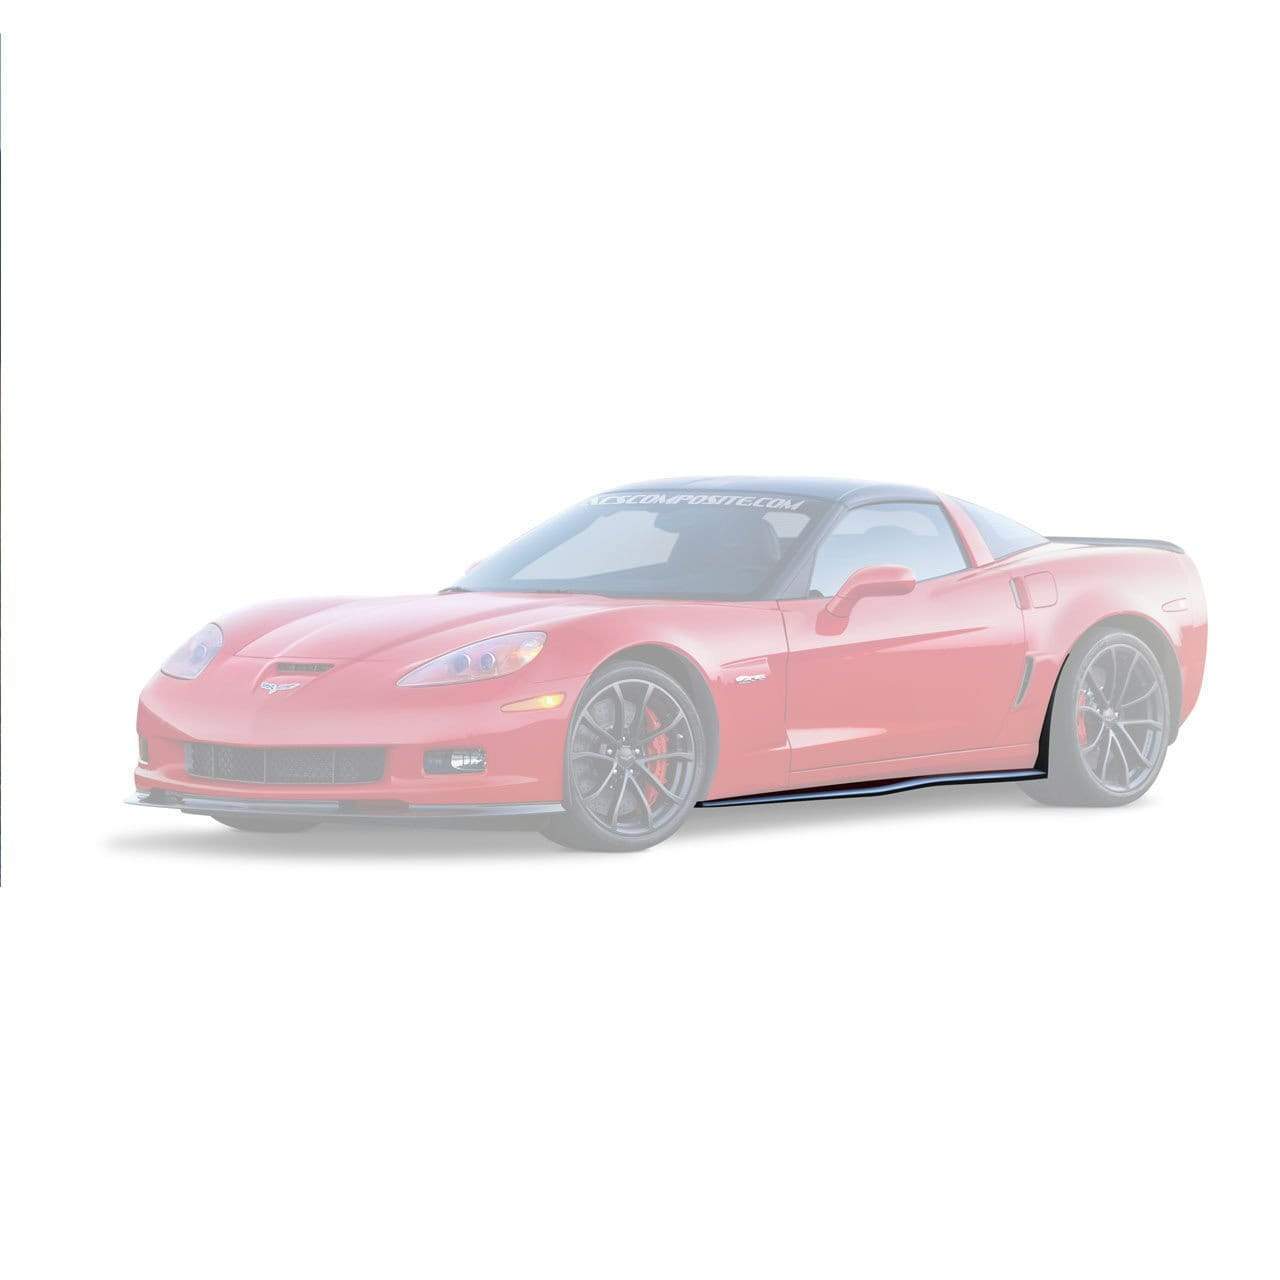 ACS Composite Zero6 Side Rockers in Black Primer for C6 Corvette (SKU: 27-4-043 CFZ) with Rear Deflectors (SKU: 27-4-027) - Enhanced Downforce and Paint Protection